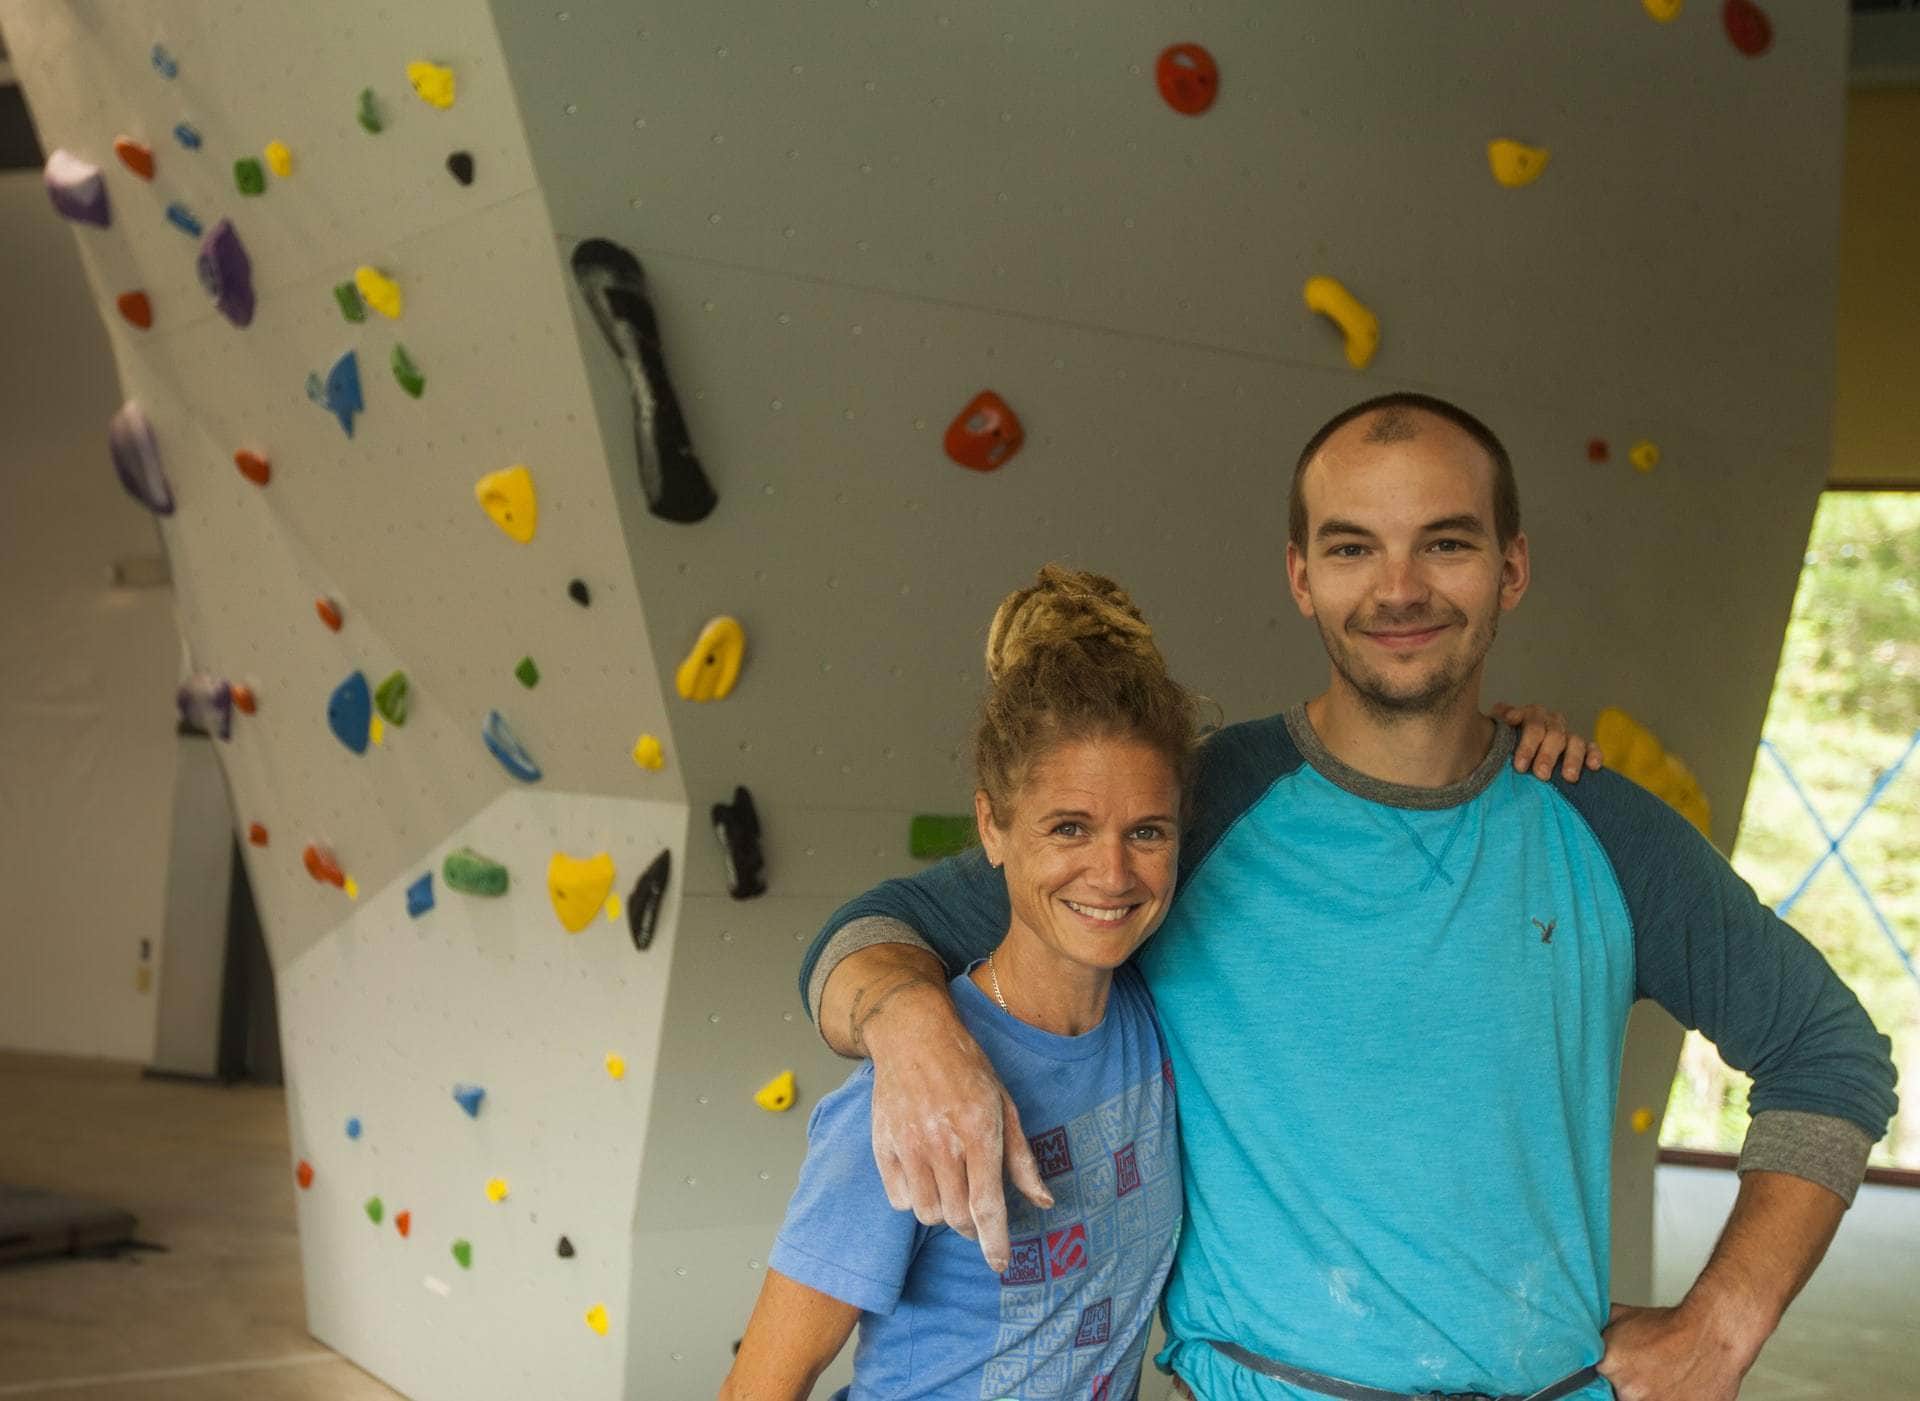 Salt Pump Climbing is excited to welcome Alison Krayer and Vince Schaefer to the team.